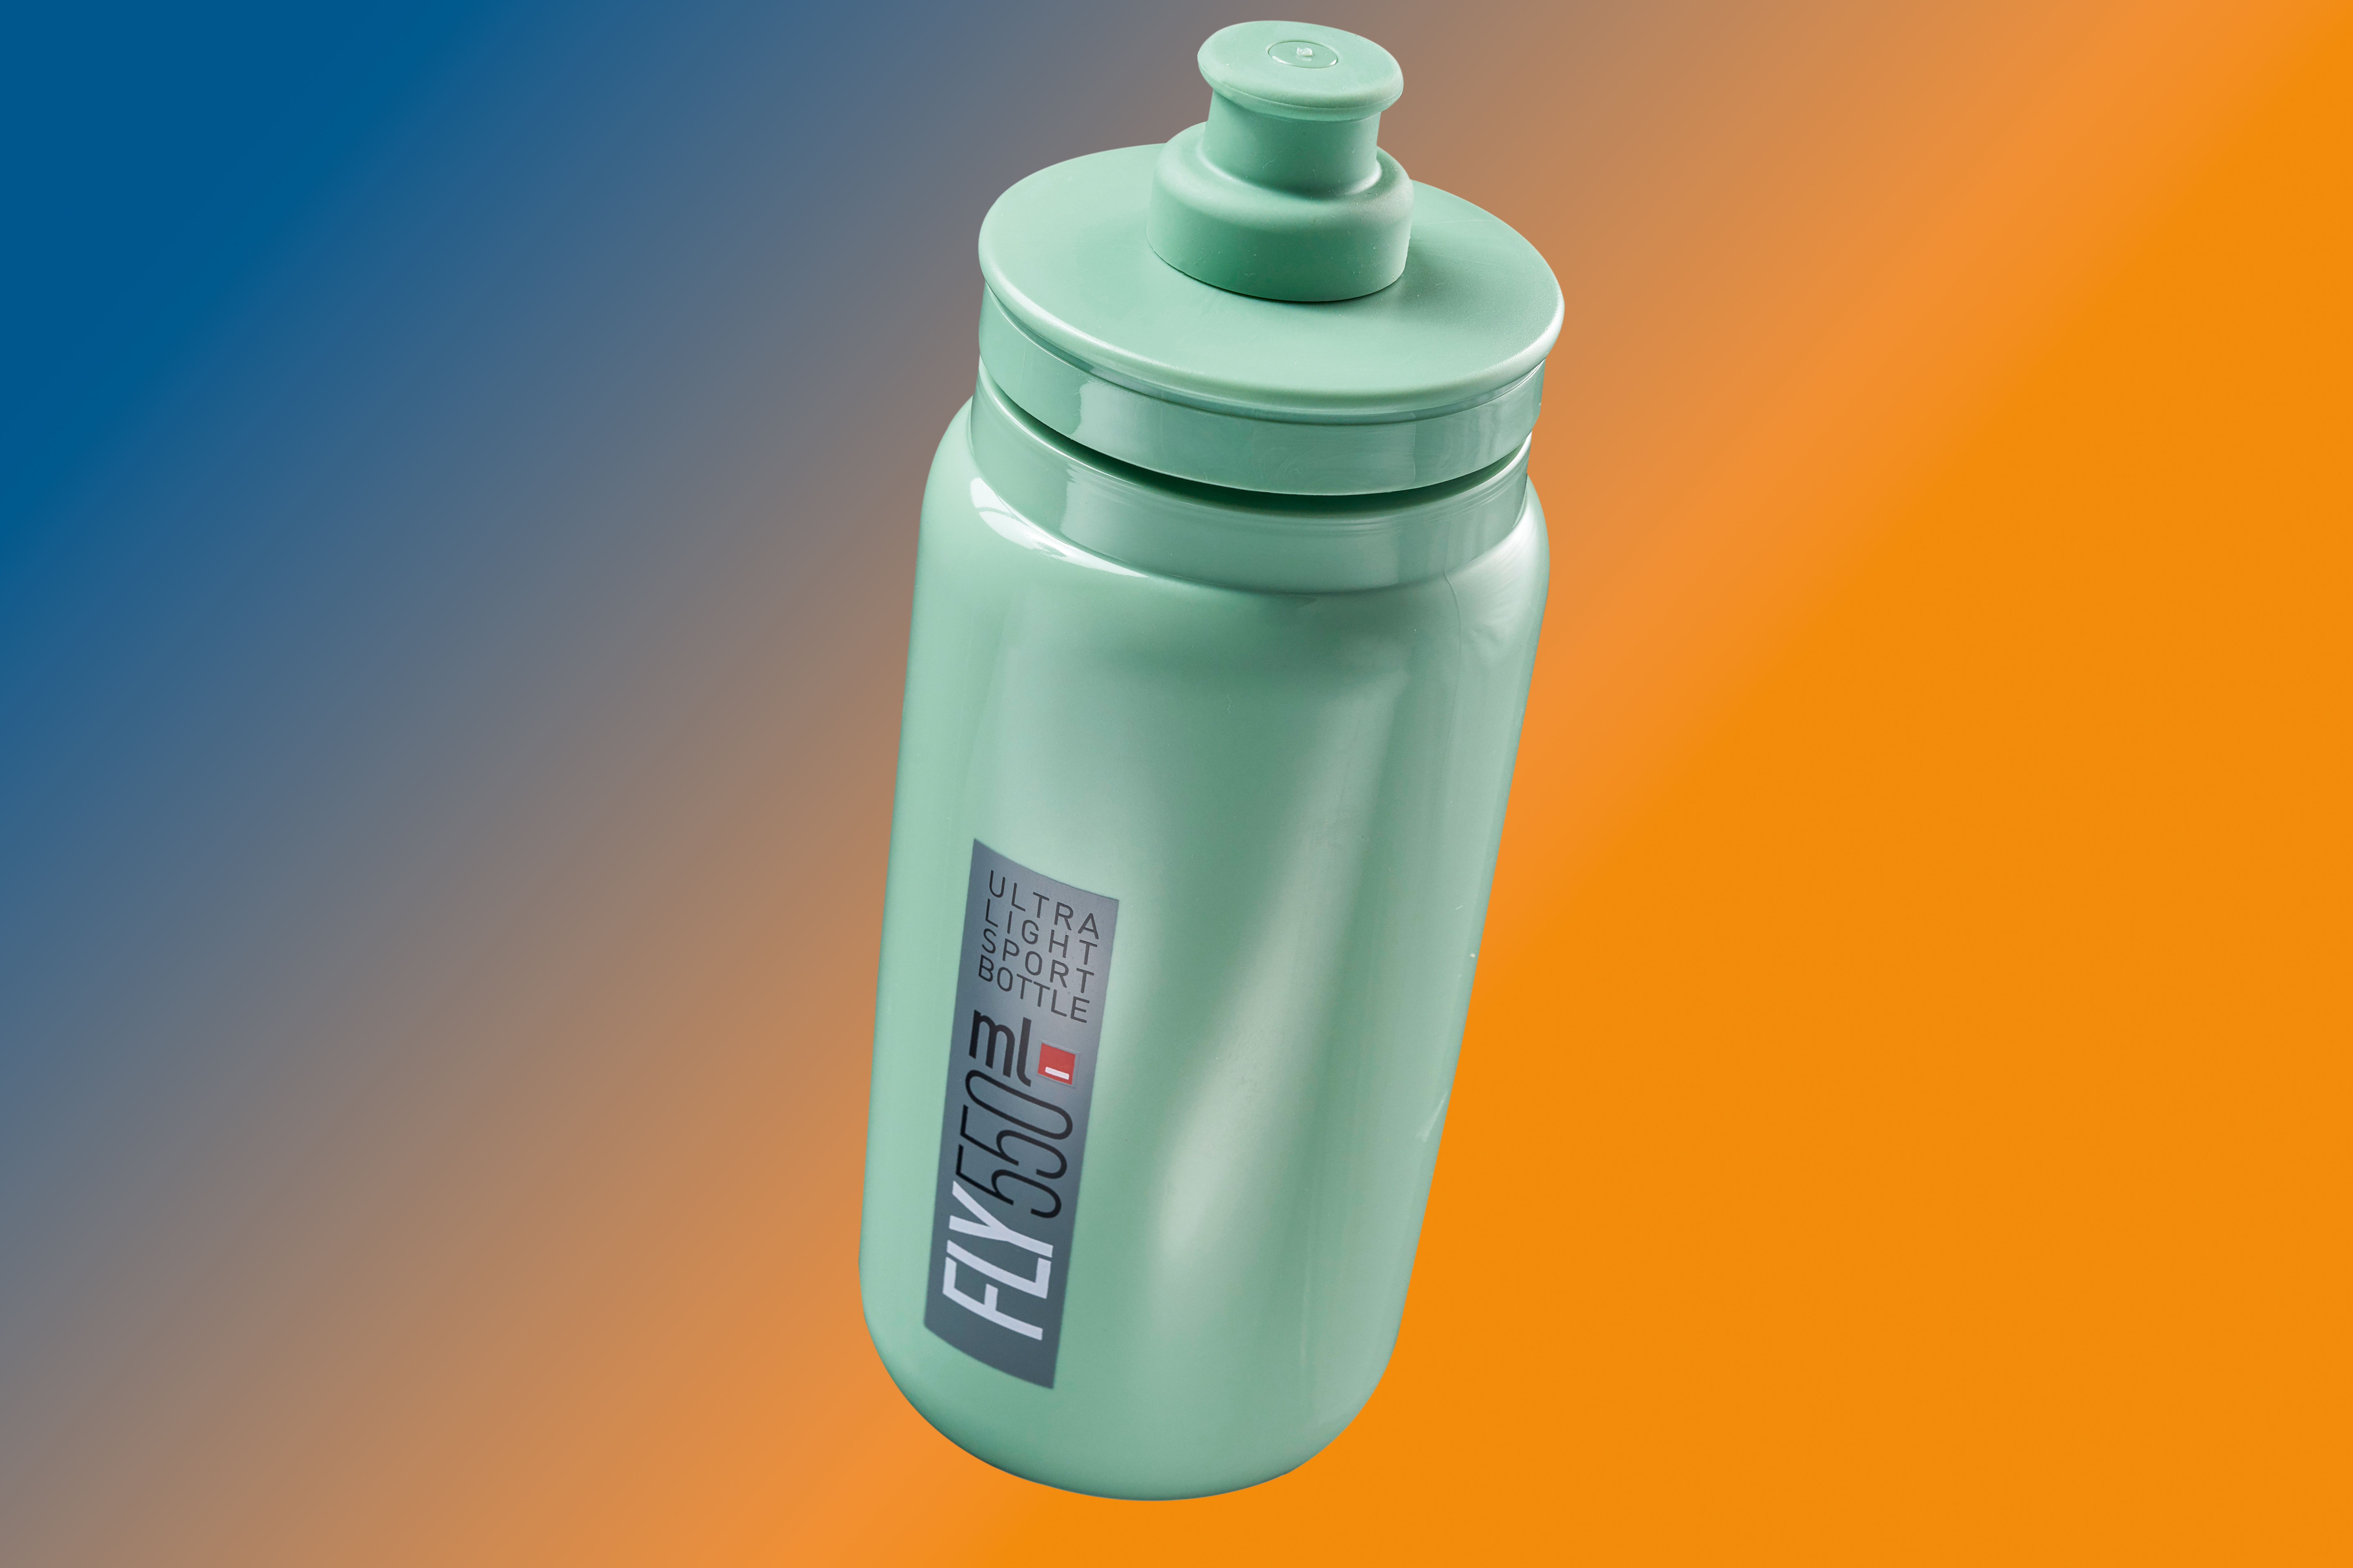 11 water bottles you can run with during training and races